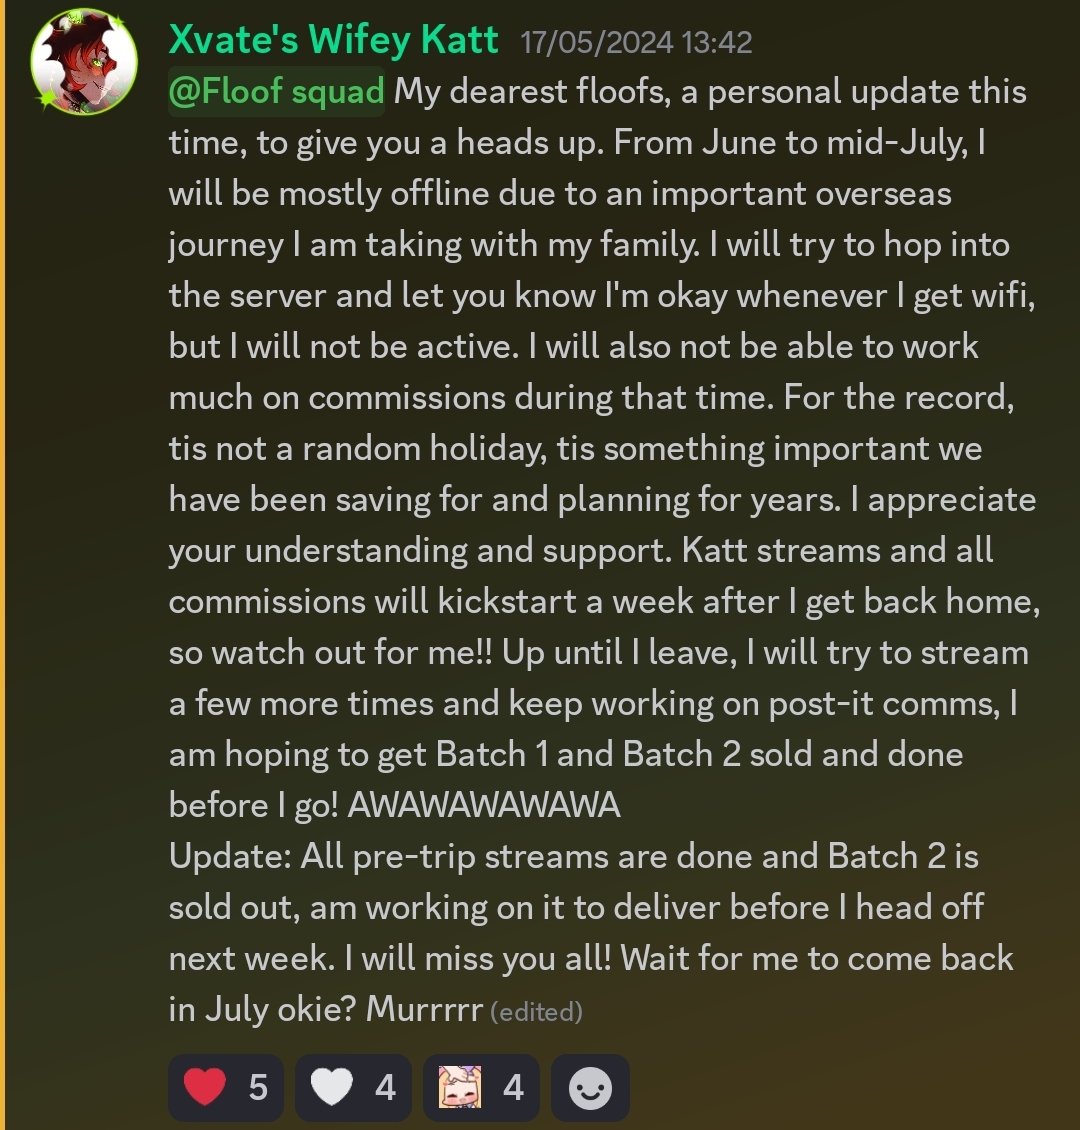 Murrr an official message to all you lovely floofs about my June hiatus for my trip.
Tldr: No content in June, cmms reopen and will return to regular streaming in mid-July!